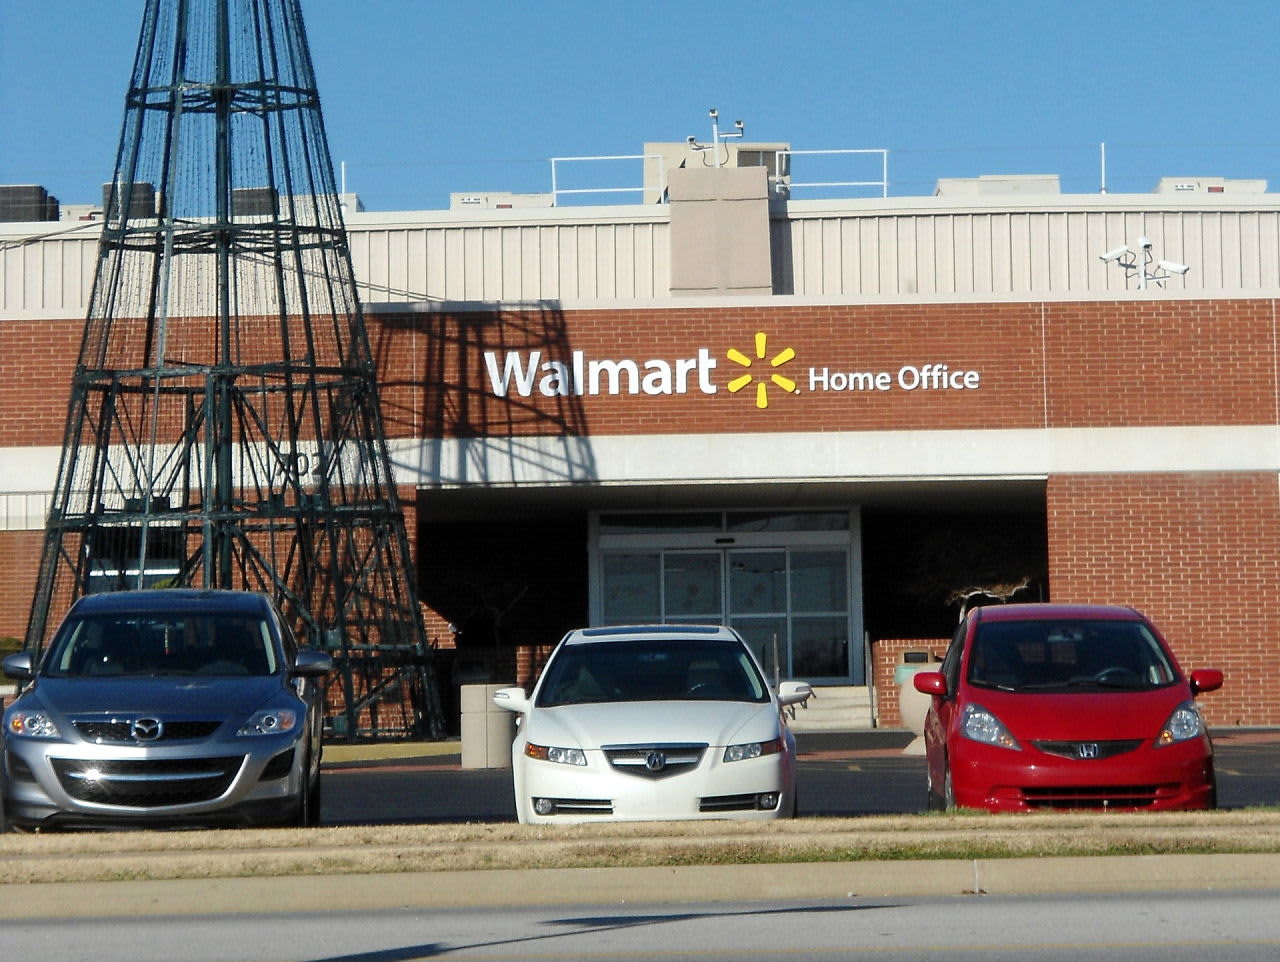 Wal-Mart Stores is testing home delivery through ride-sharing companies.